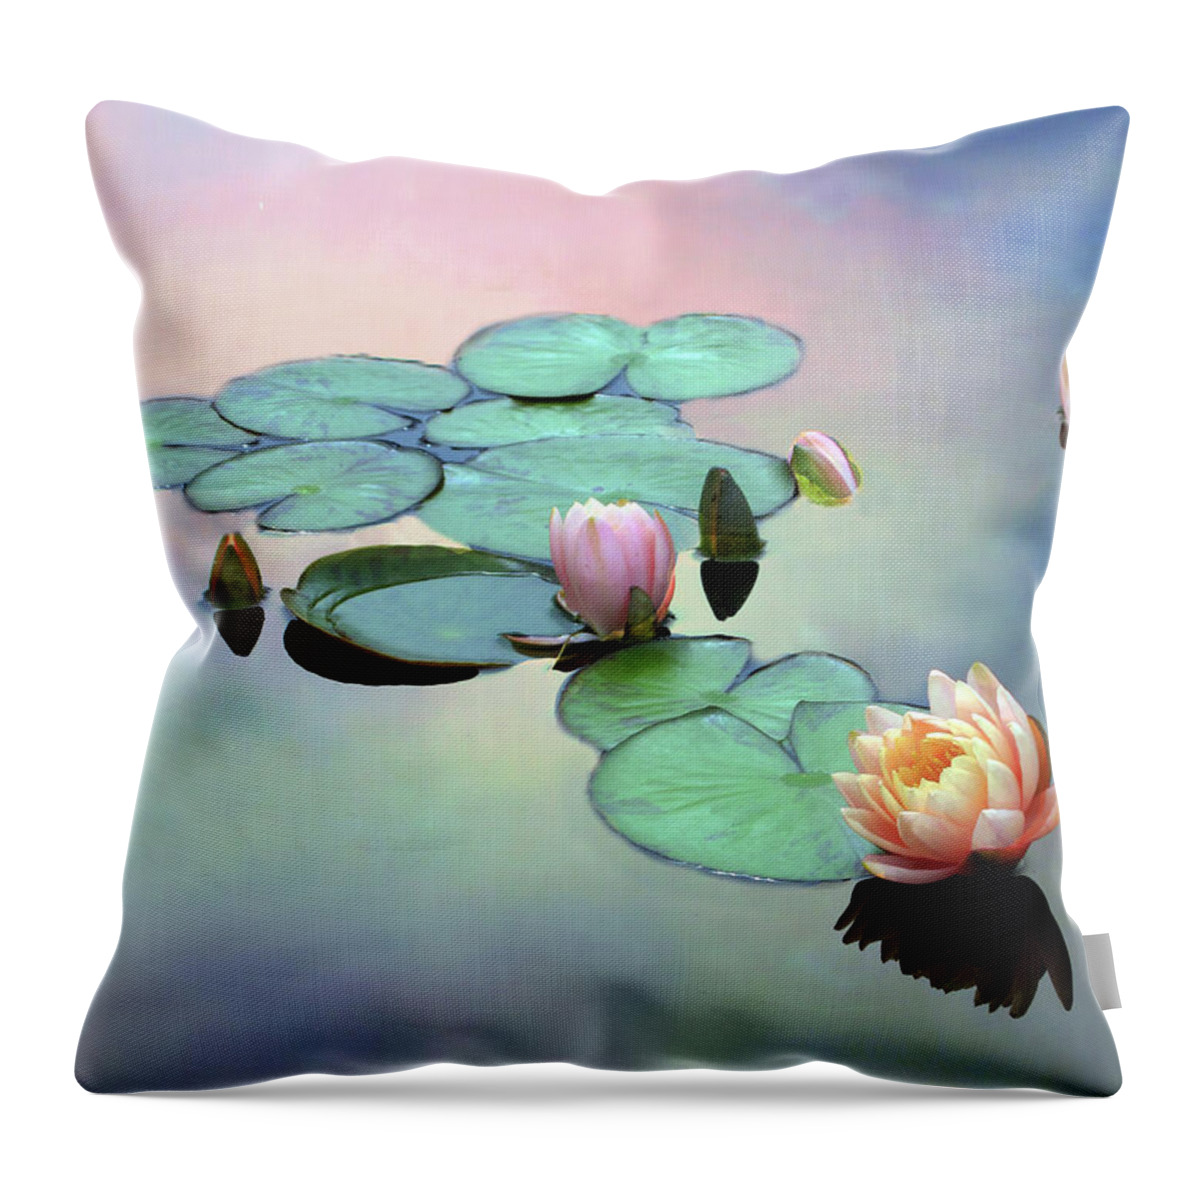 Lilies Throw Pillow featuring the photograph Afloat by Jessica Jenney